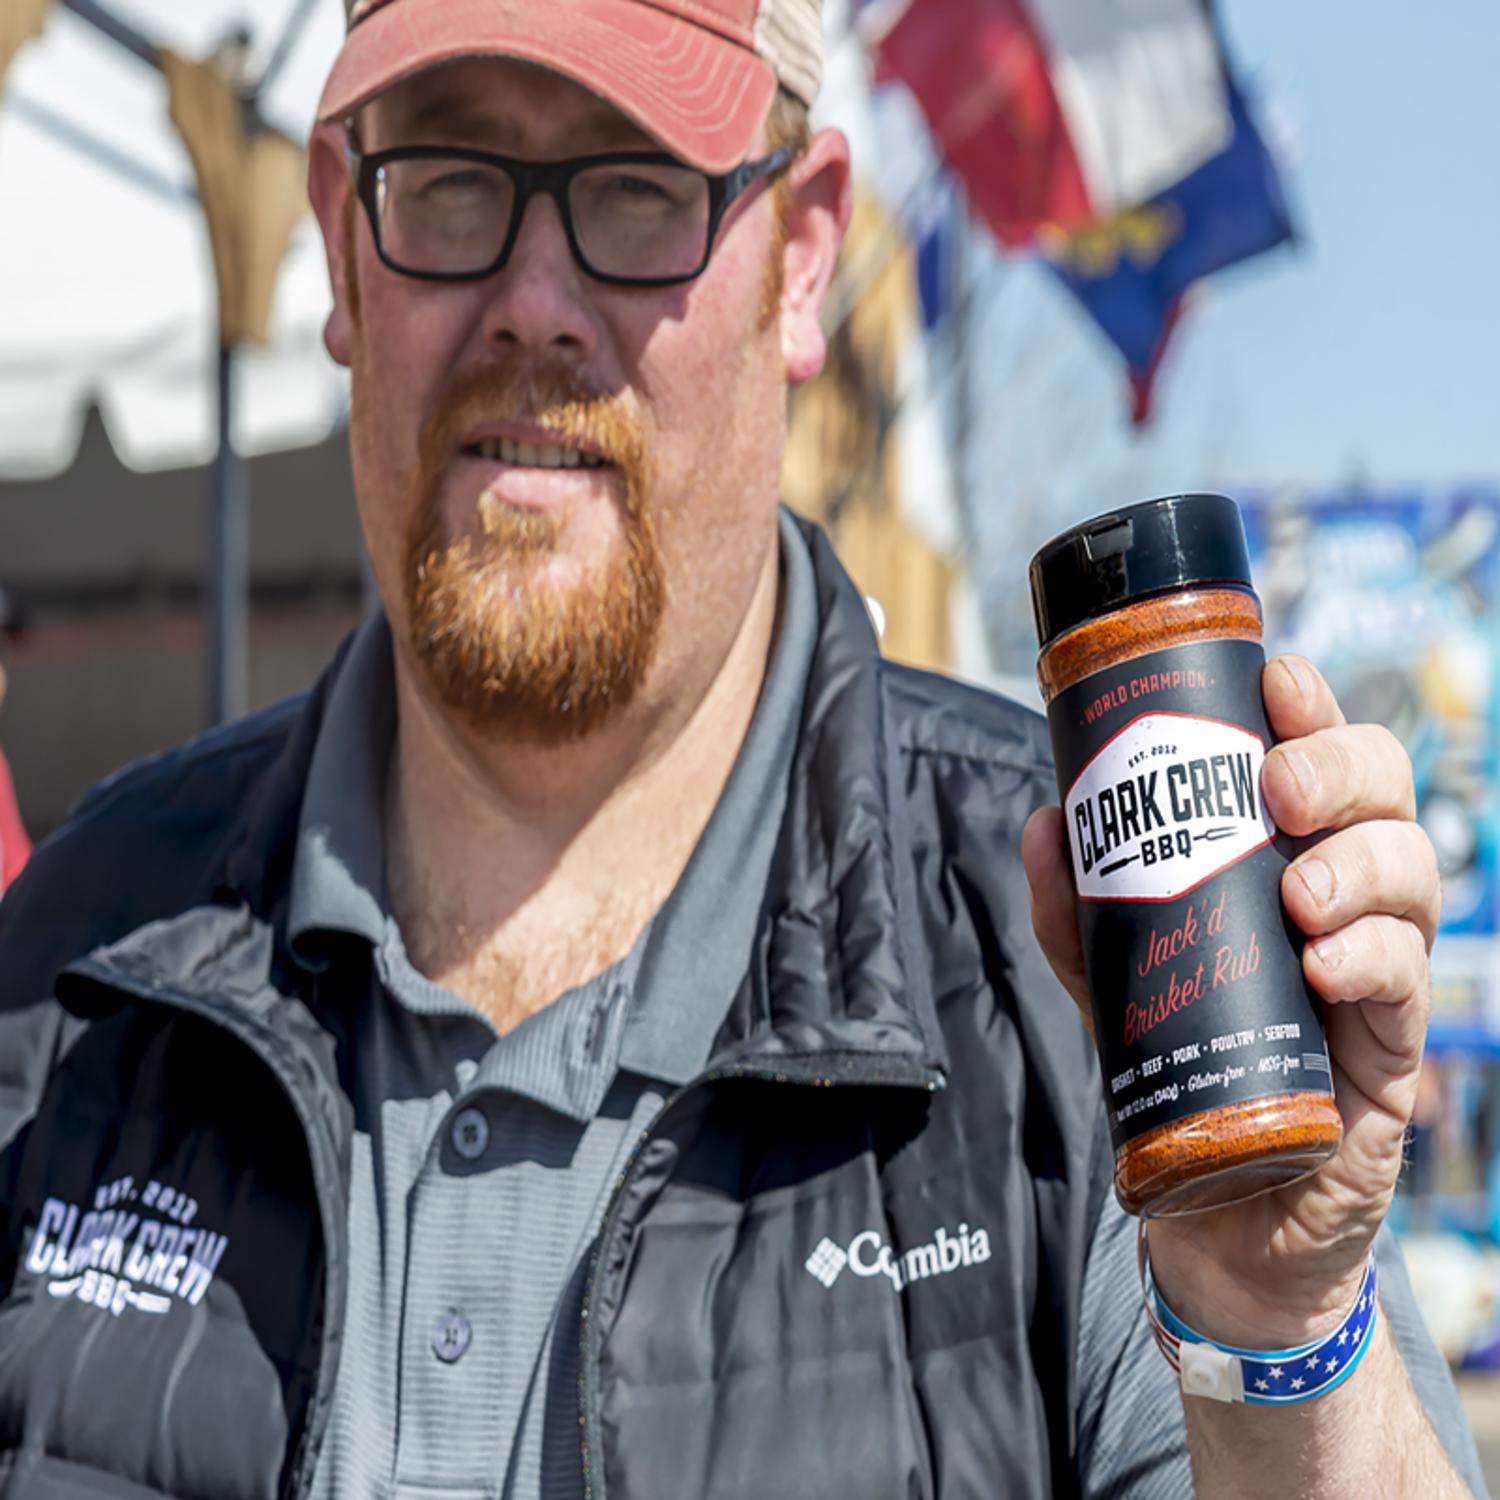 EAT Barbecue The Most Powerful Stuff Rub 29 oz.